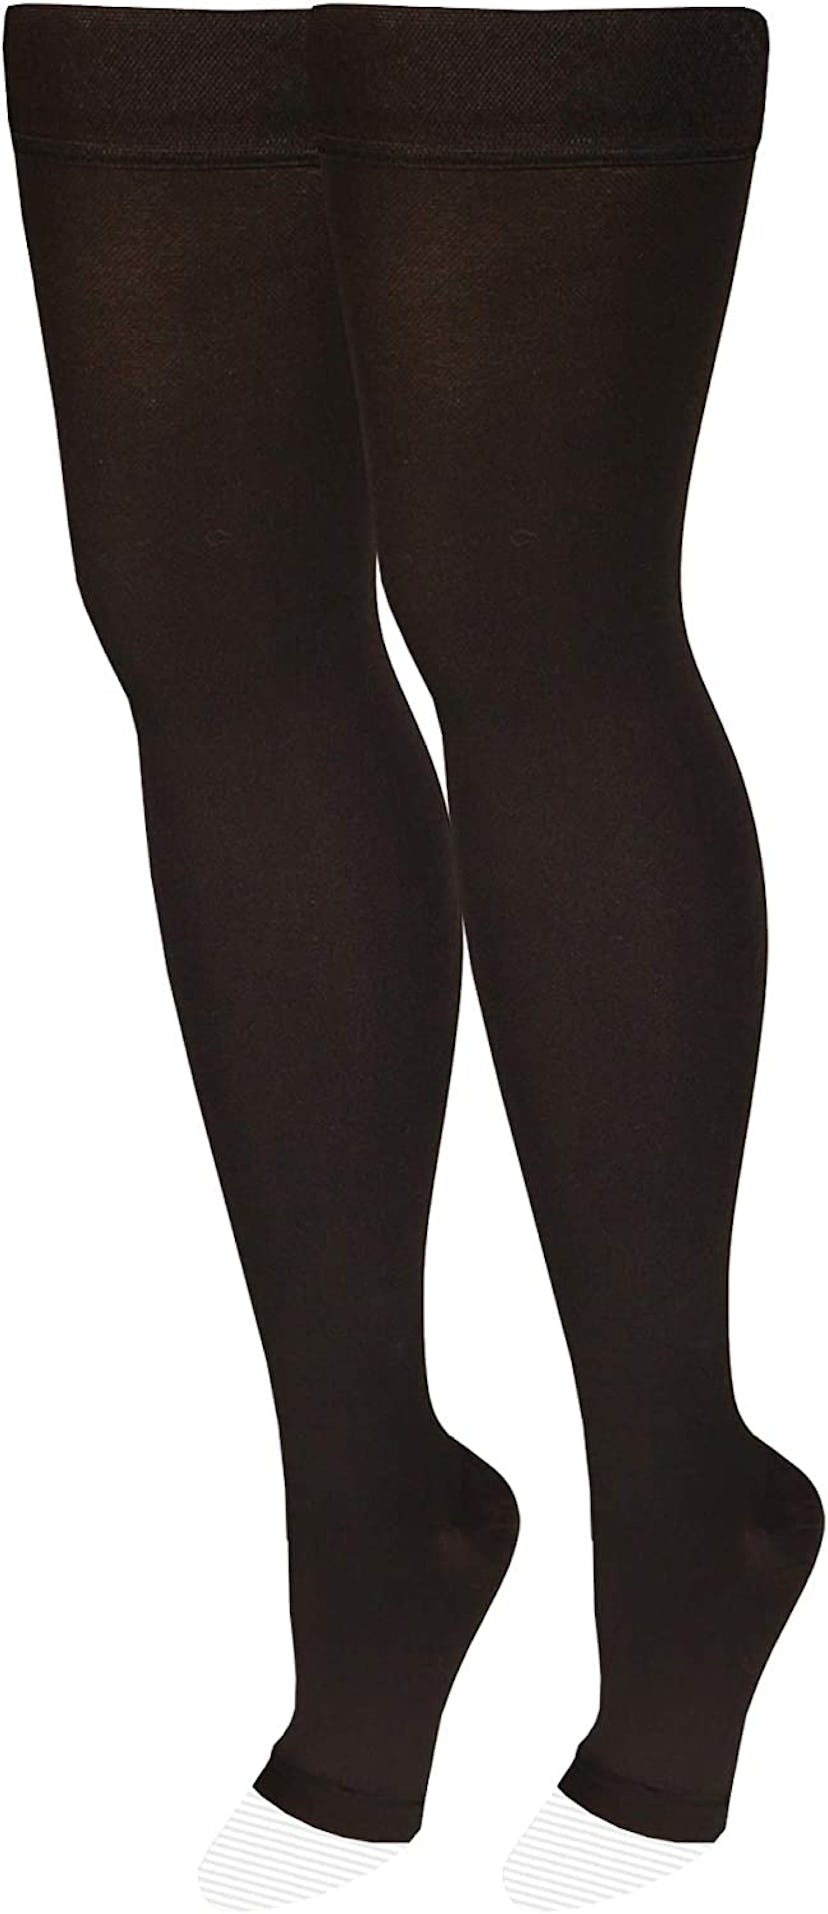 NuVein Medical Compression Stockings